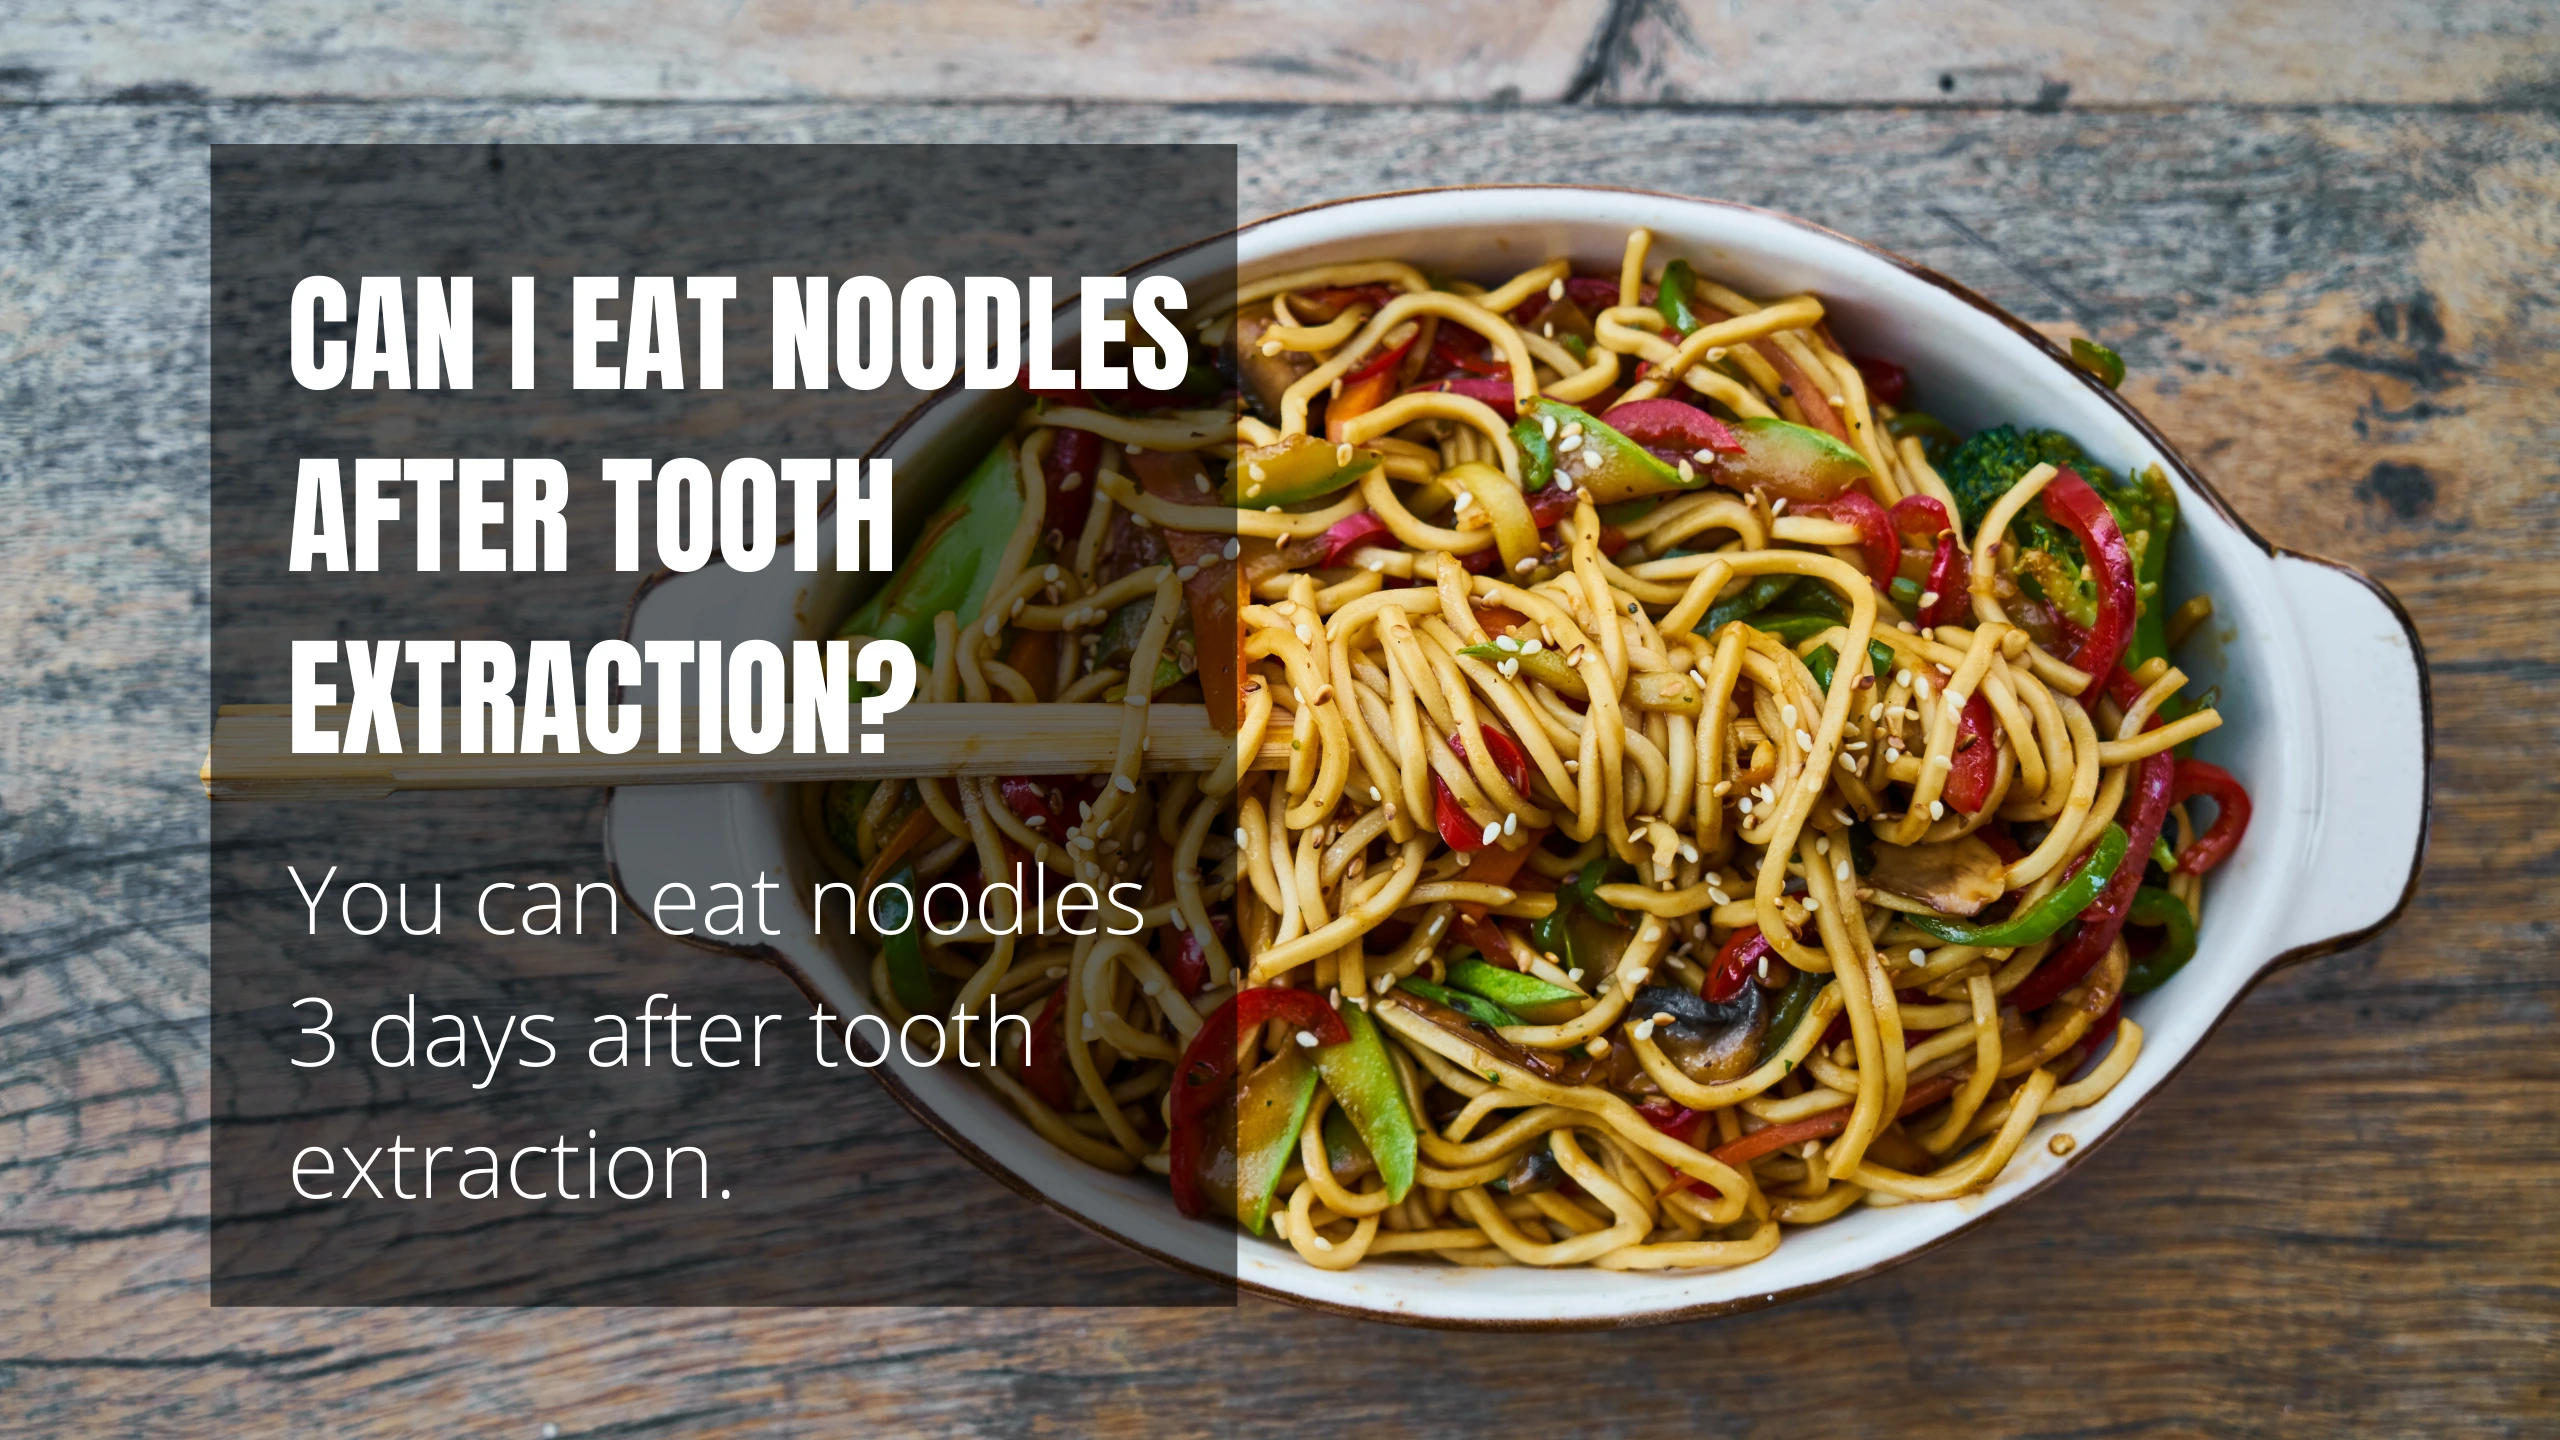 Can I Eat Noodles After Tooth Extraction